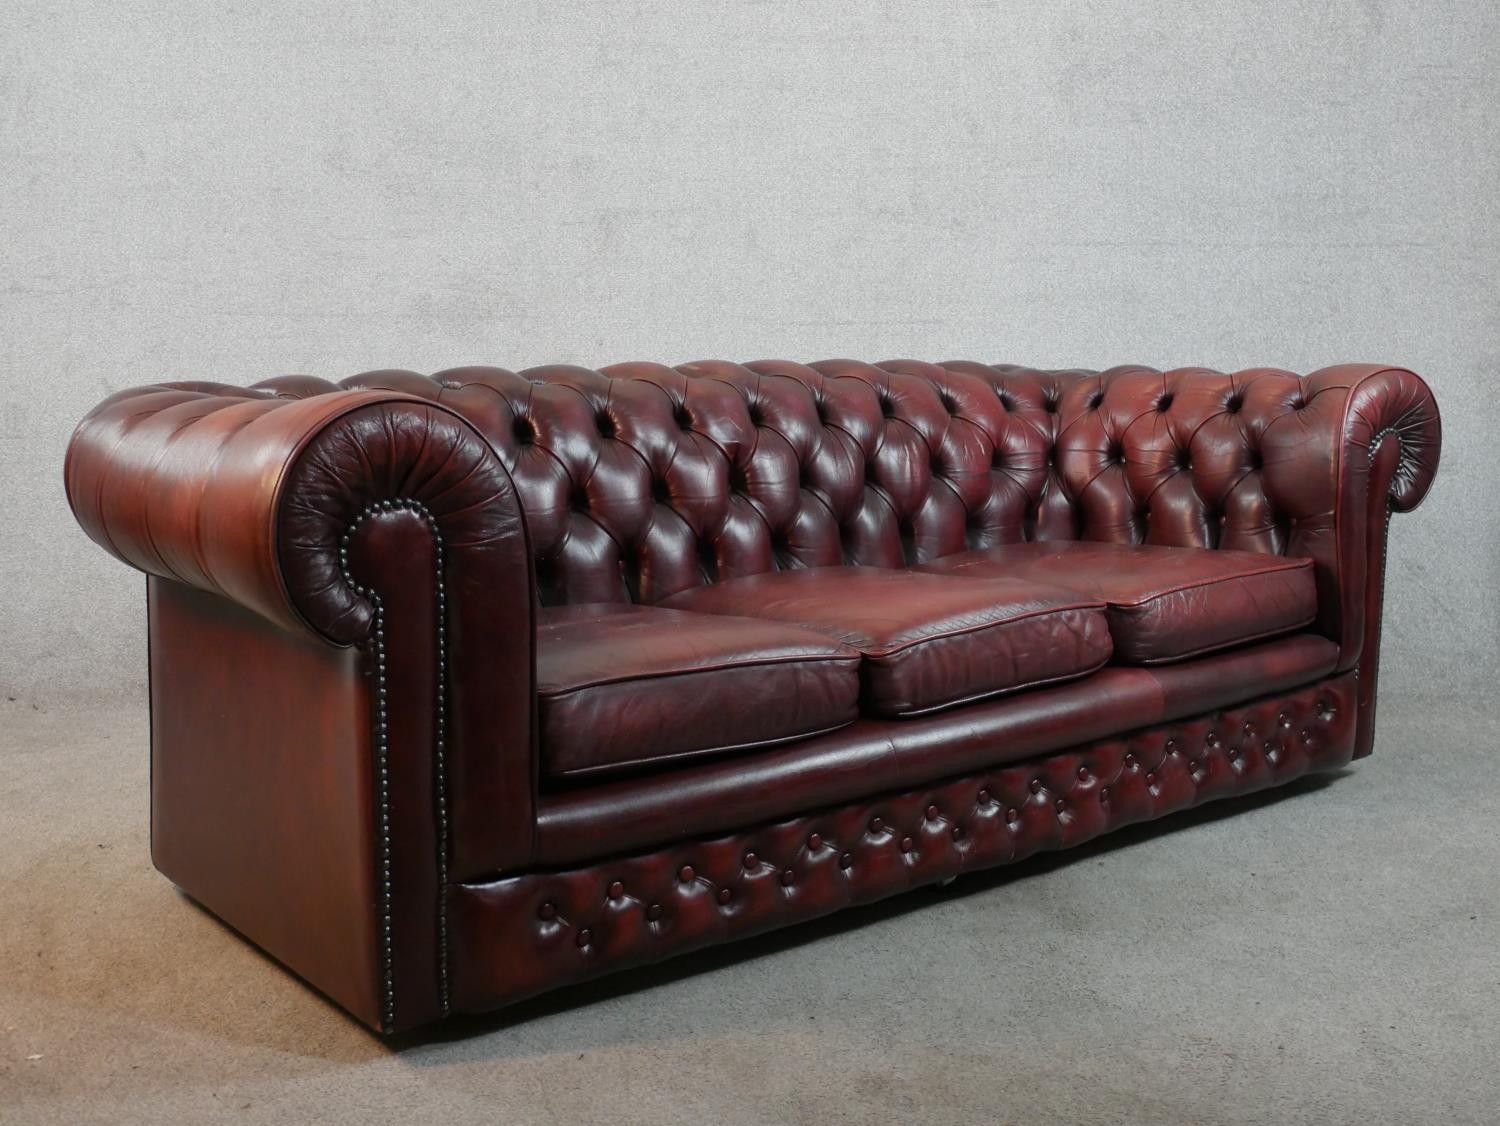 A 20th century oxblood red Chesterfield three seater settee, raised on casters, H.65 W.195 D.67cm - Image 5 of 5